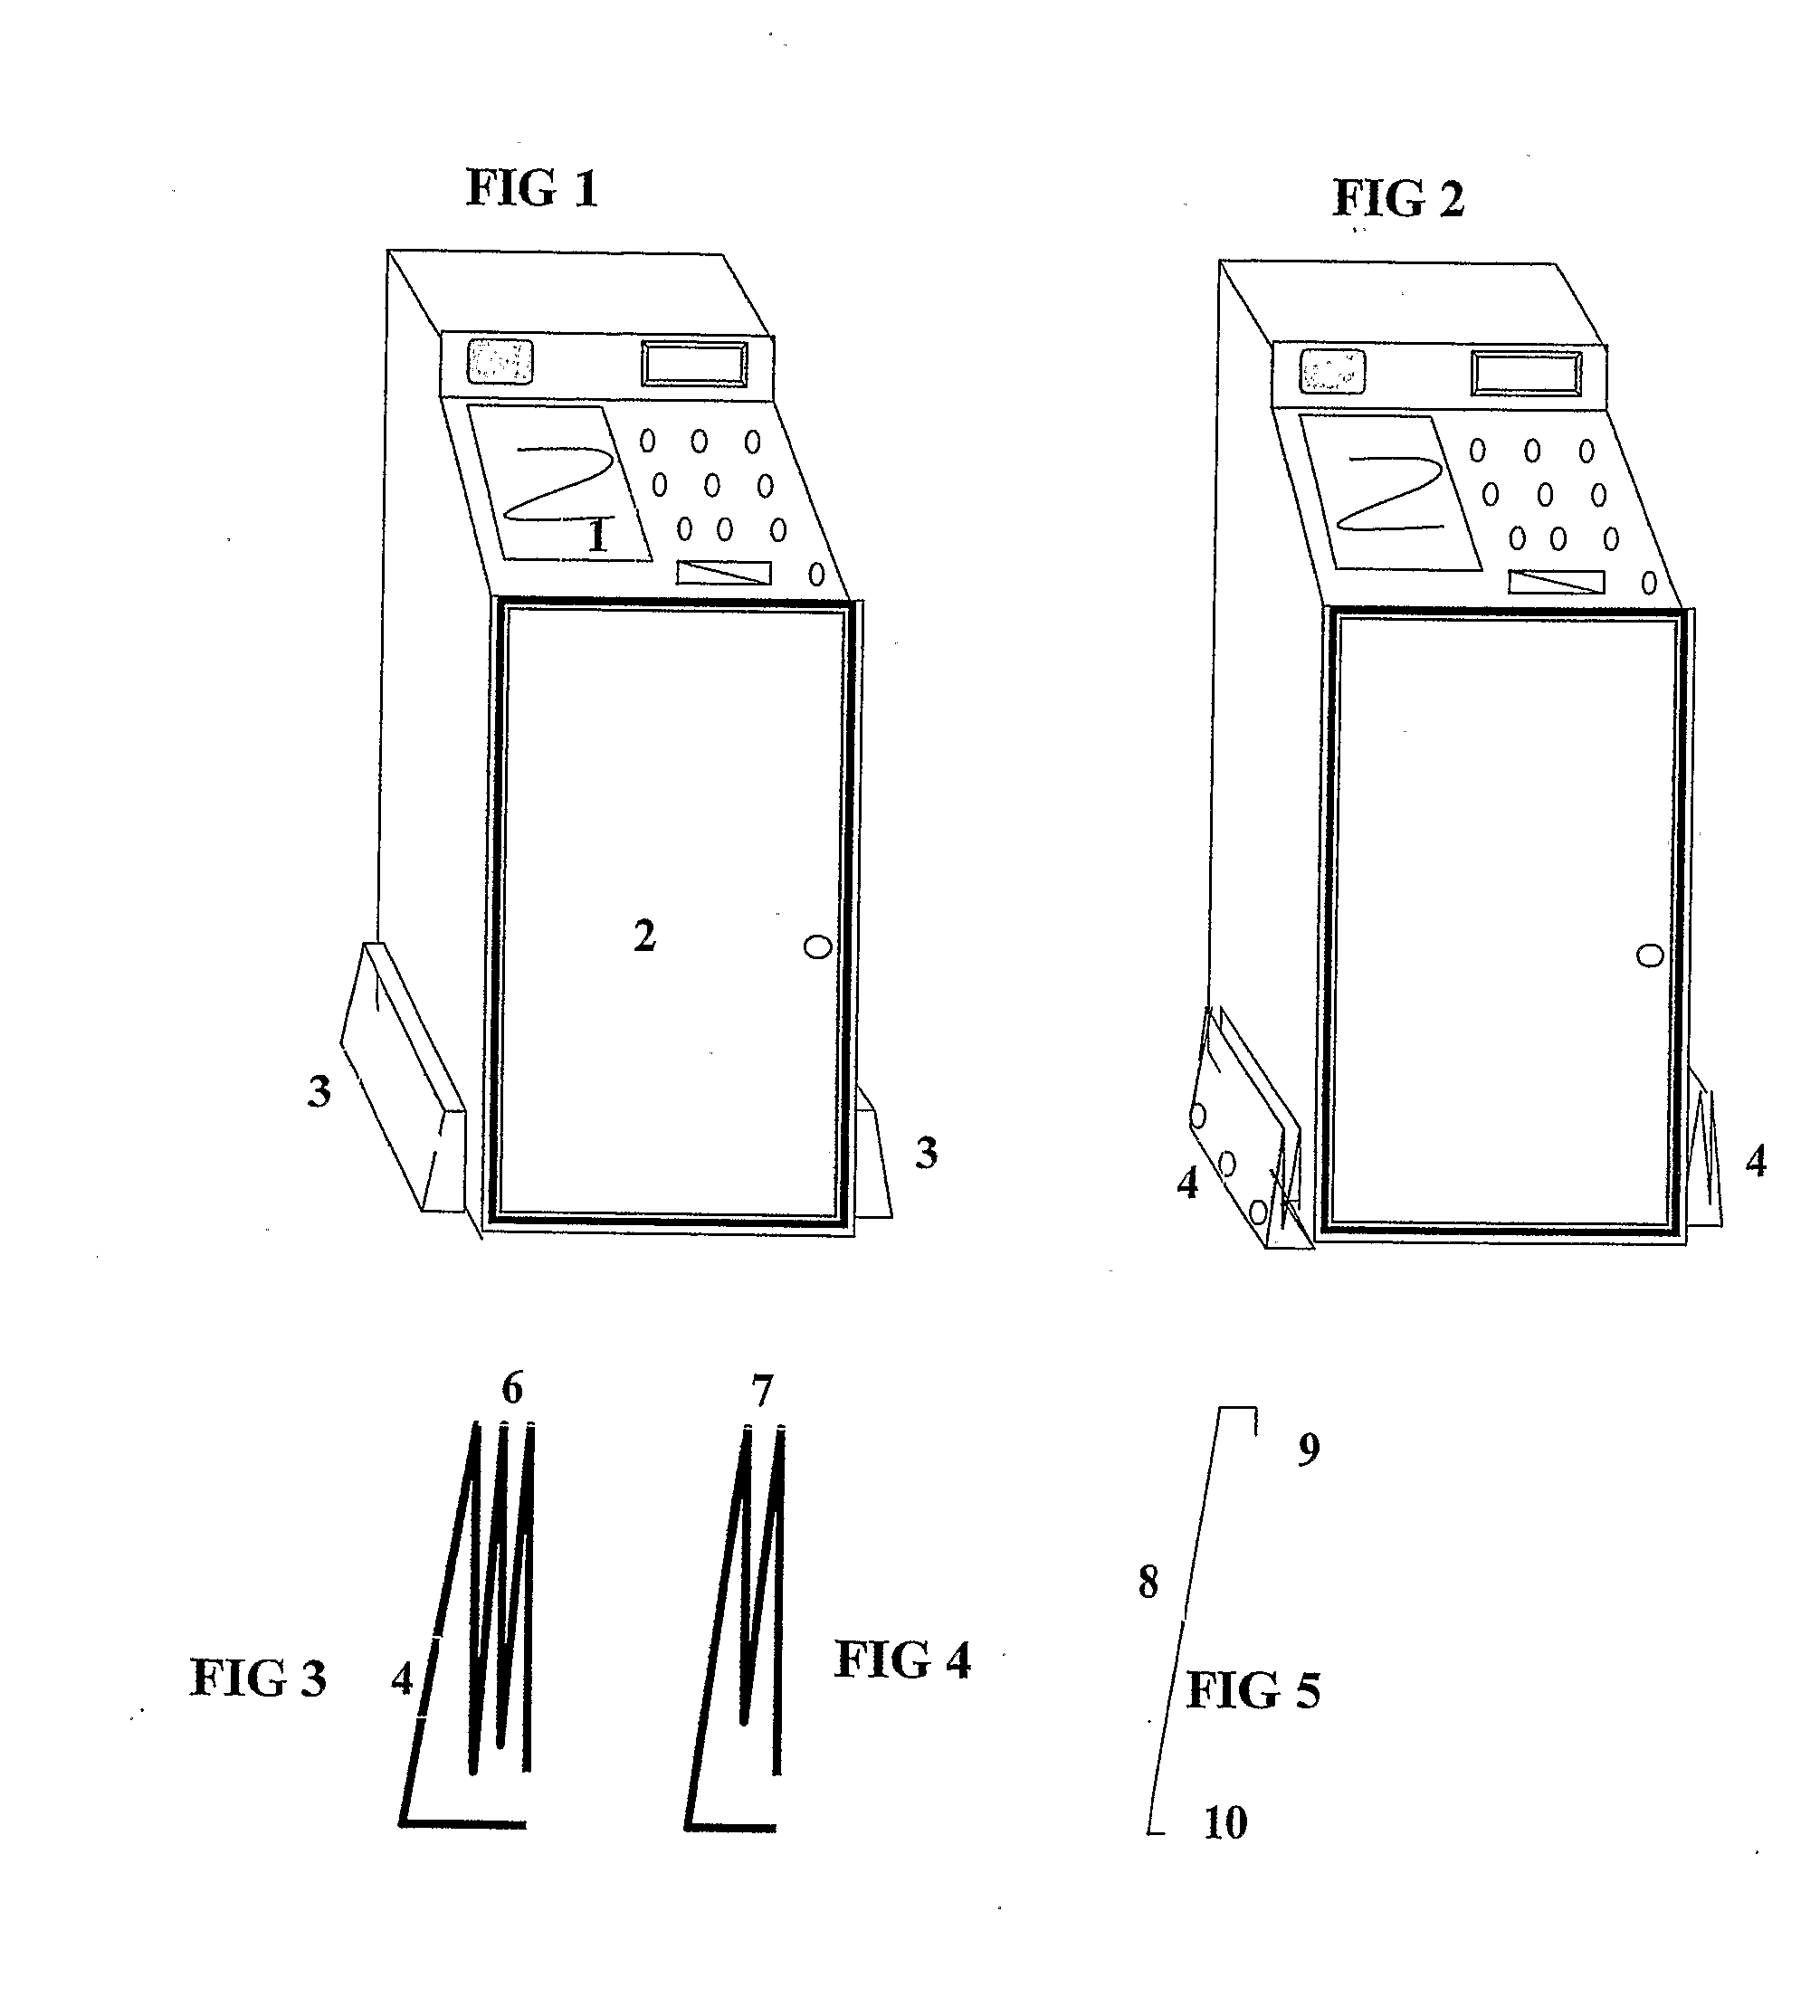 Assemblies and method for securing surface mounted articles to accommodate applied loads